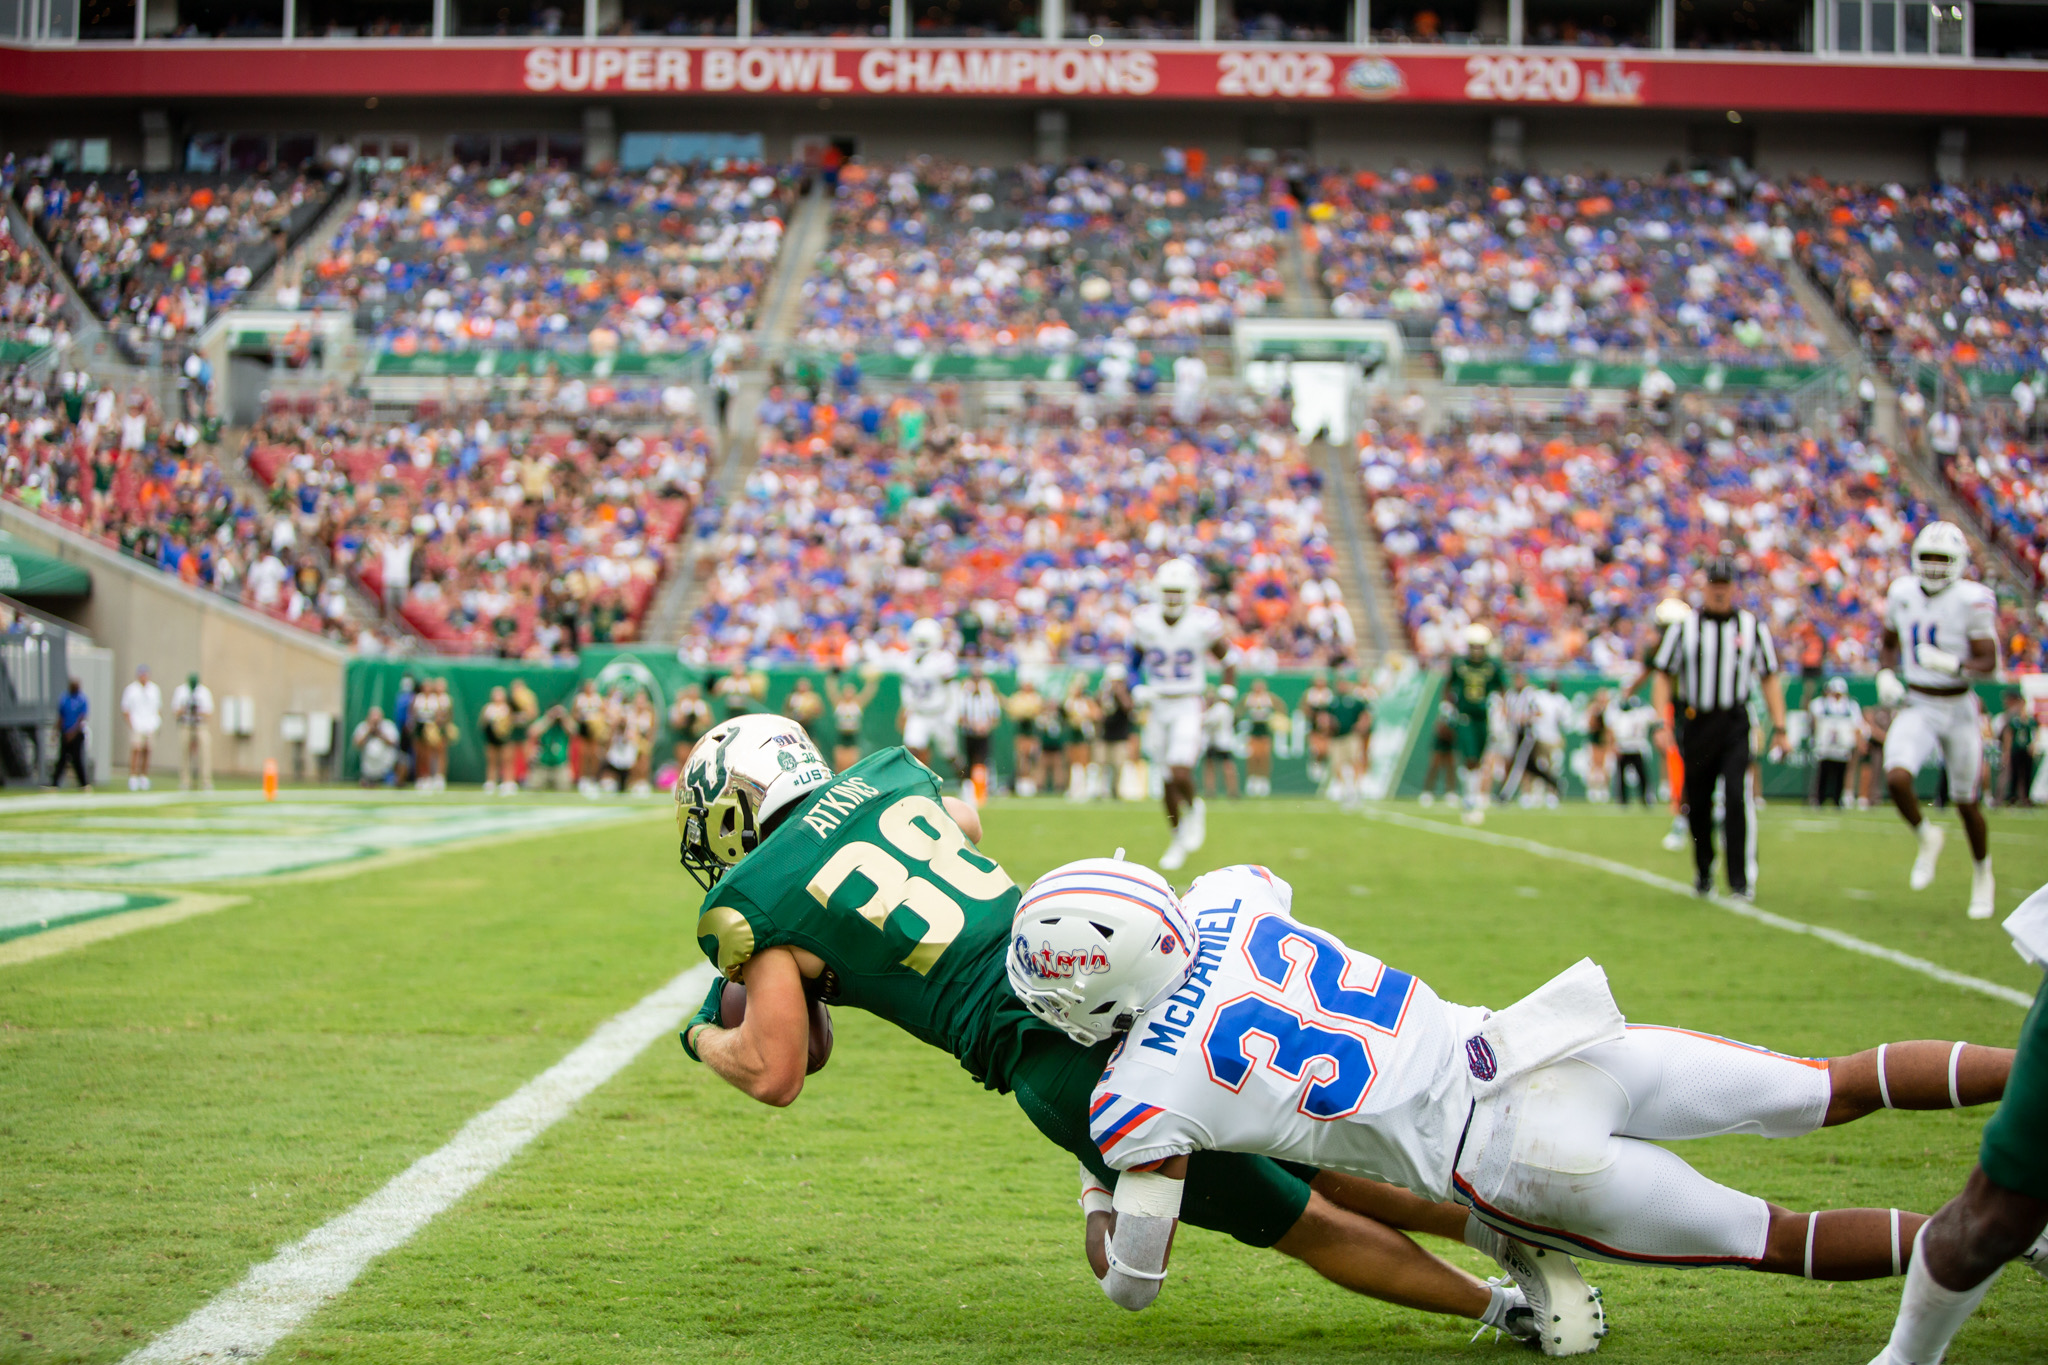 Takeaways: Bulls miss opportunities against Florida, remain undecided at quarterback